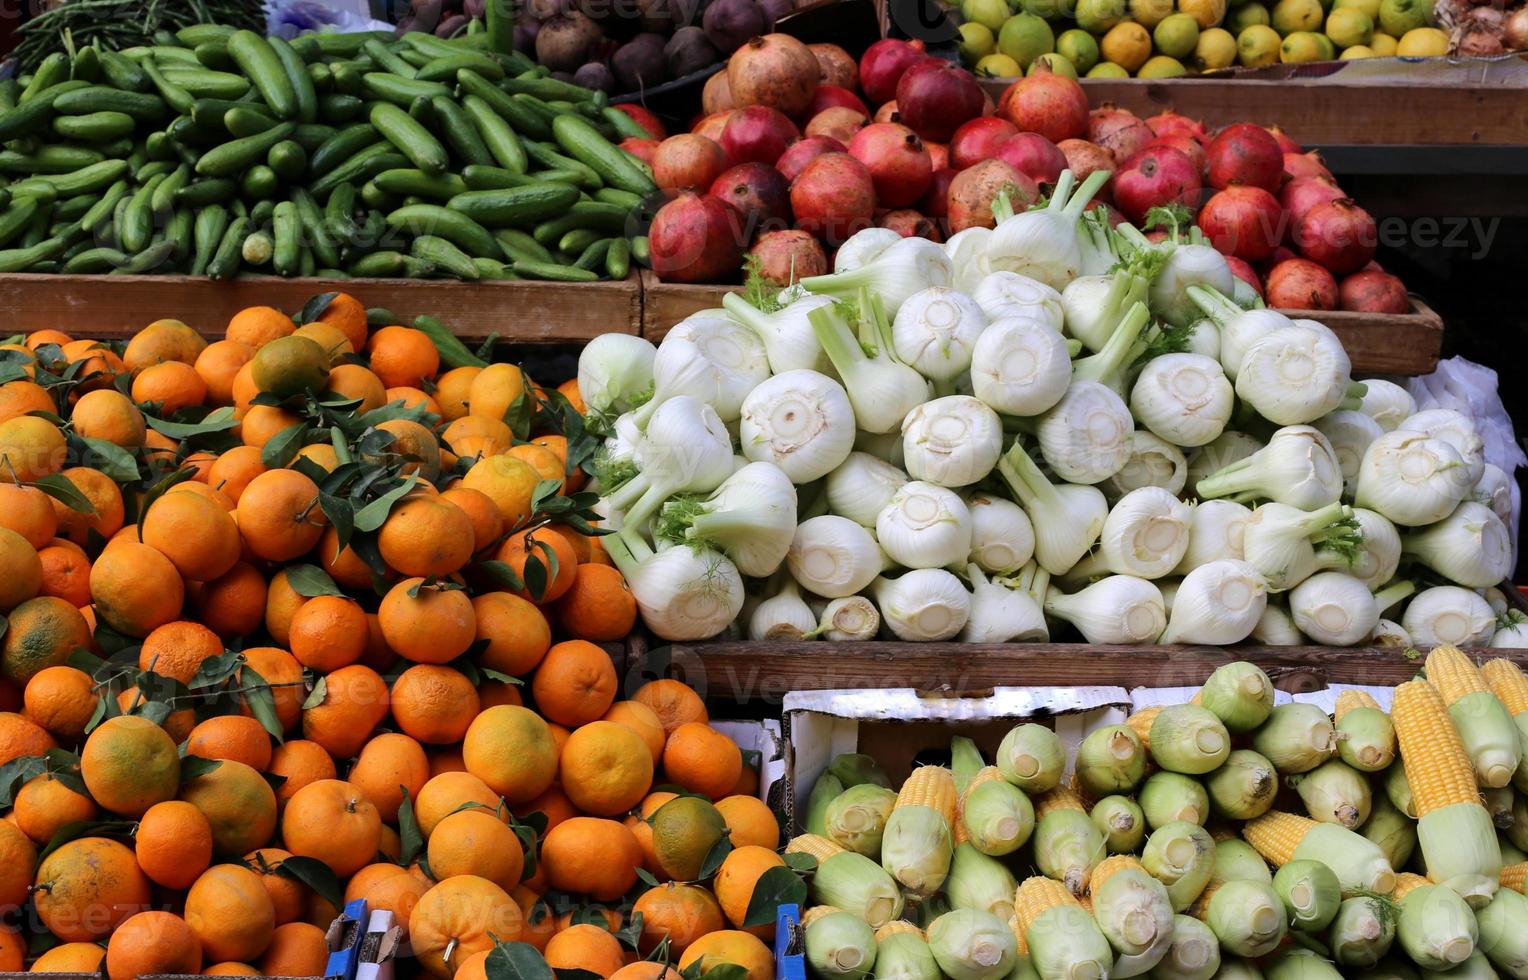 Fresh vegetables are sold at a bazaar in Israel. photo